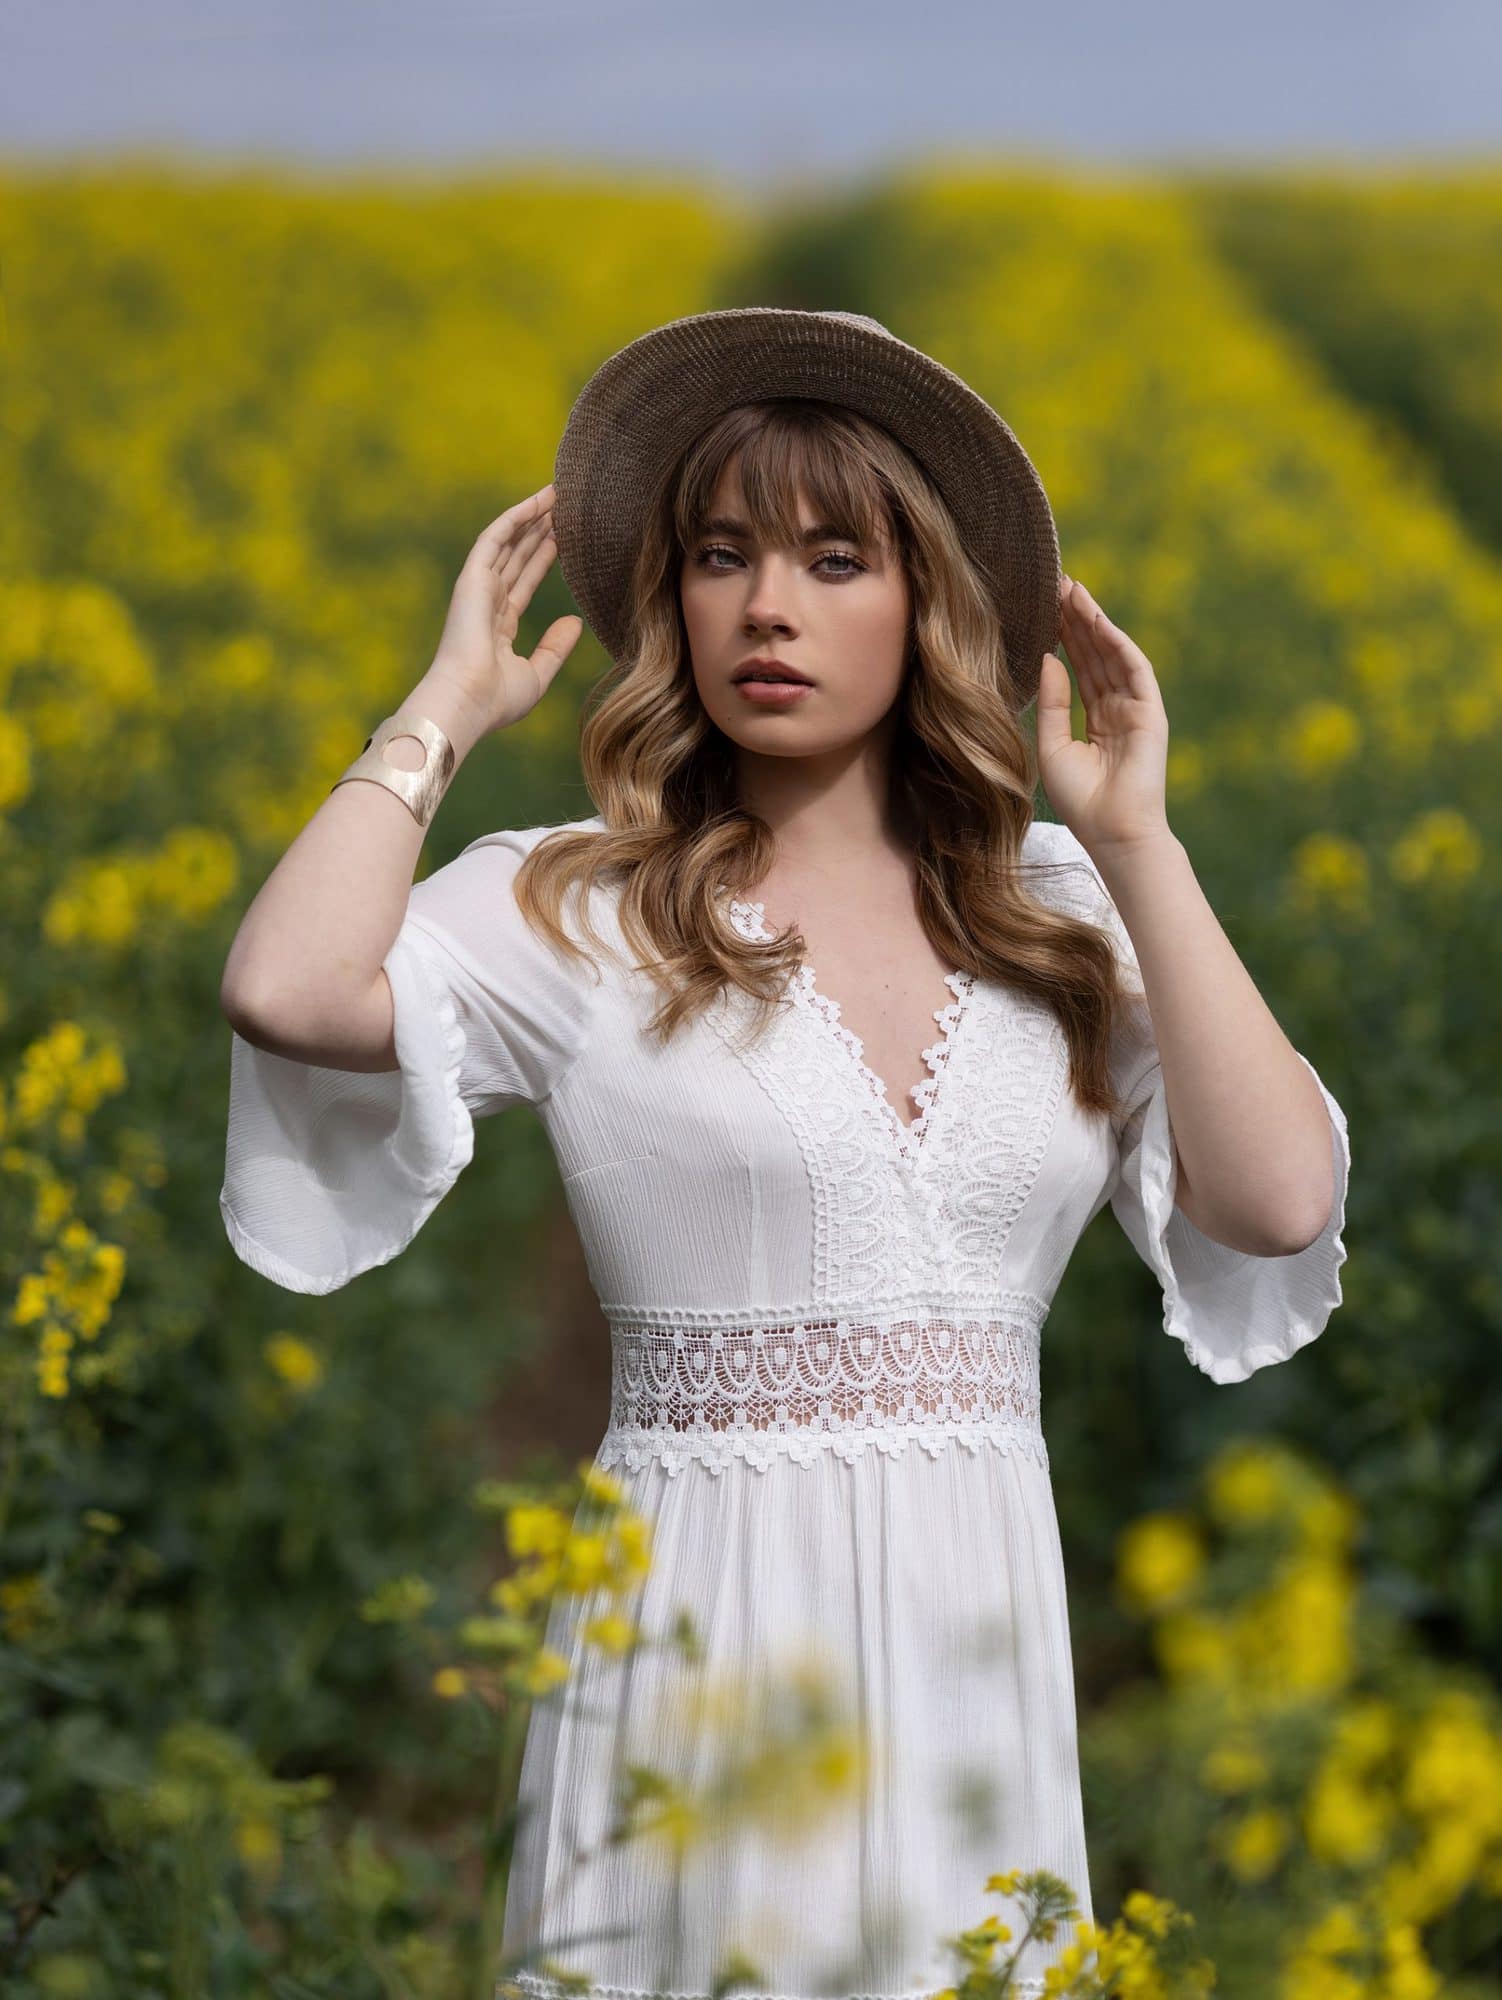 Teenage girl in a white dress stands with her face to the sun in a Rape Seed Field